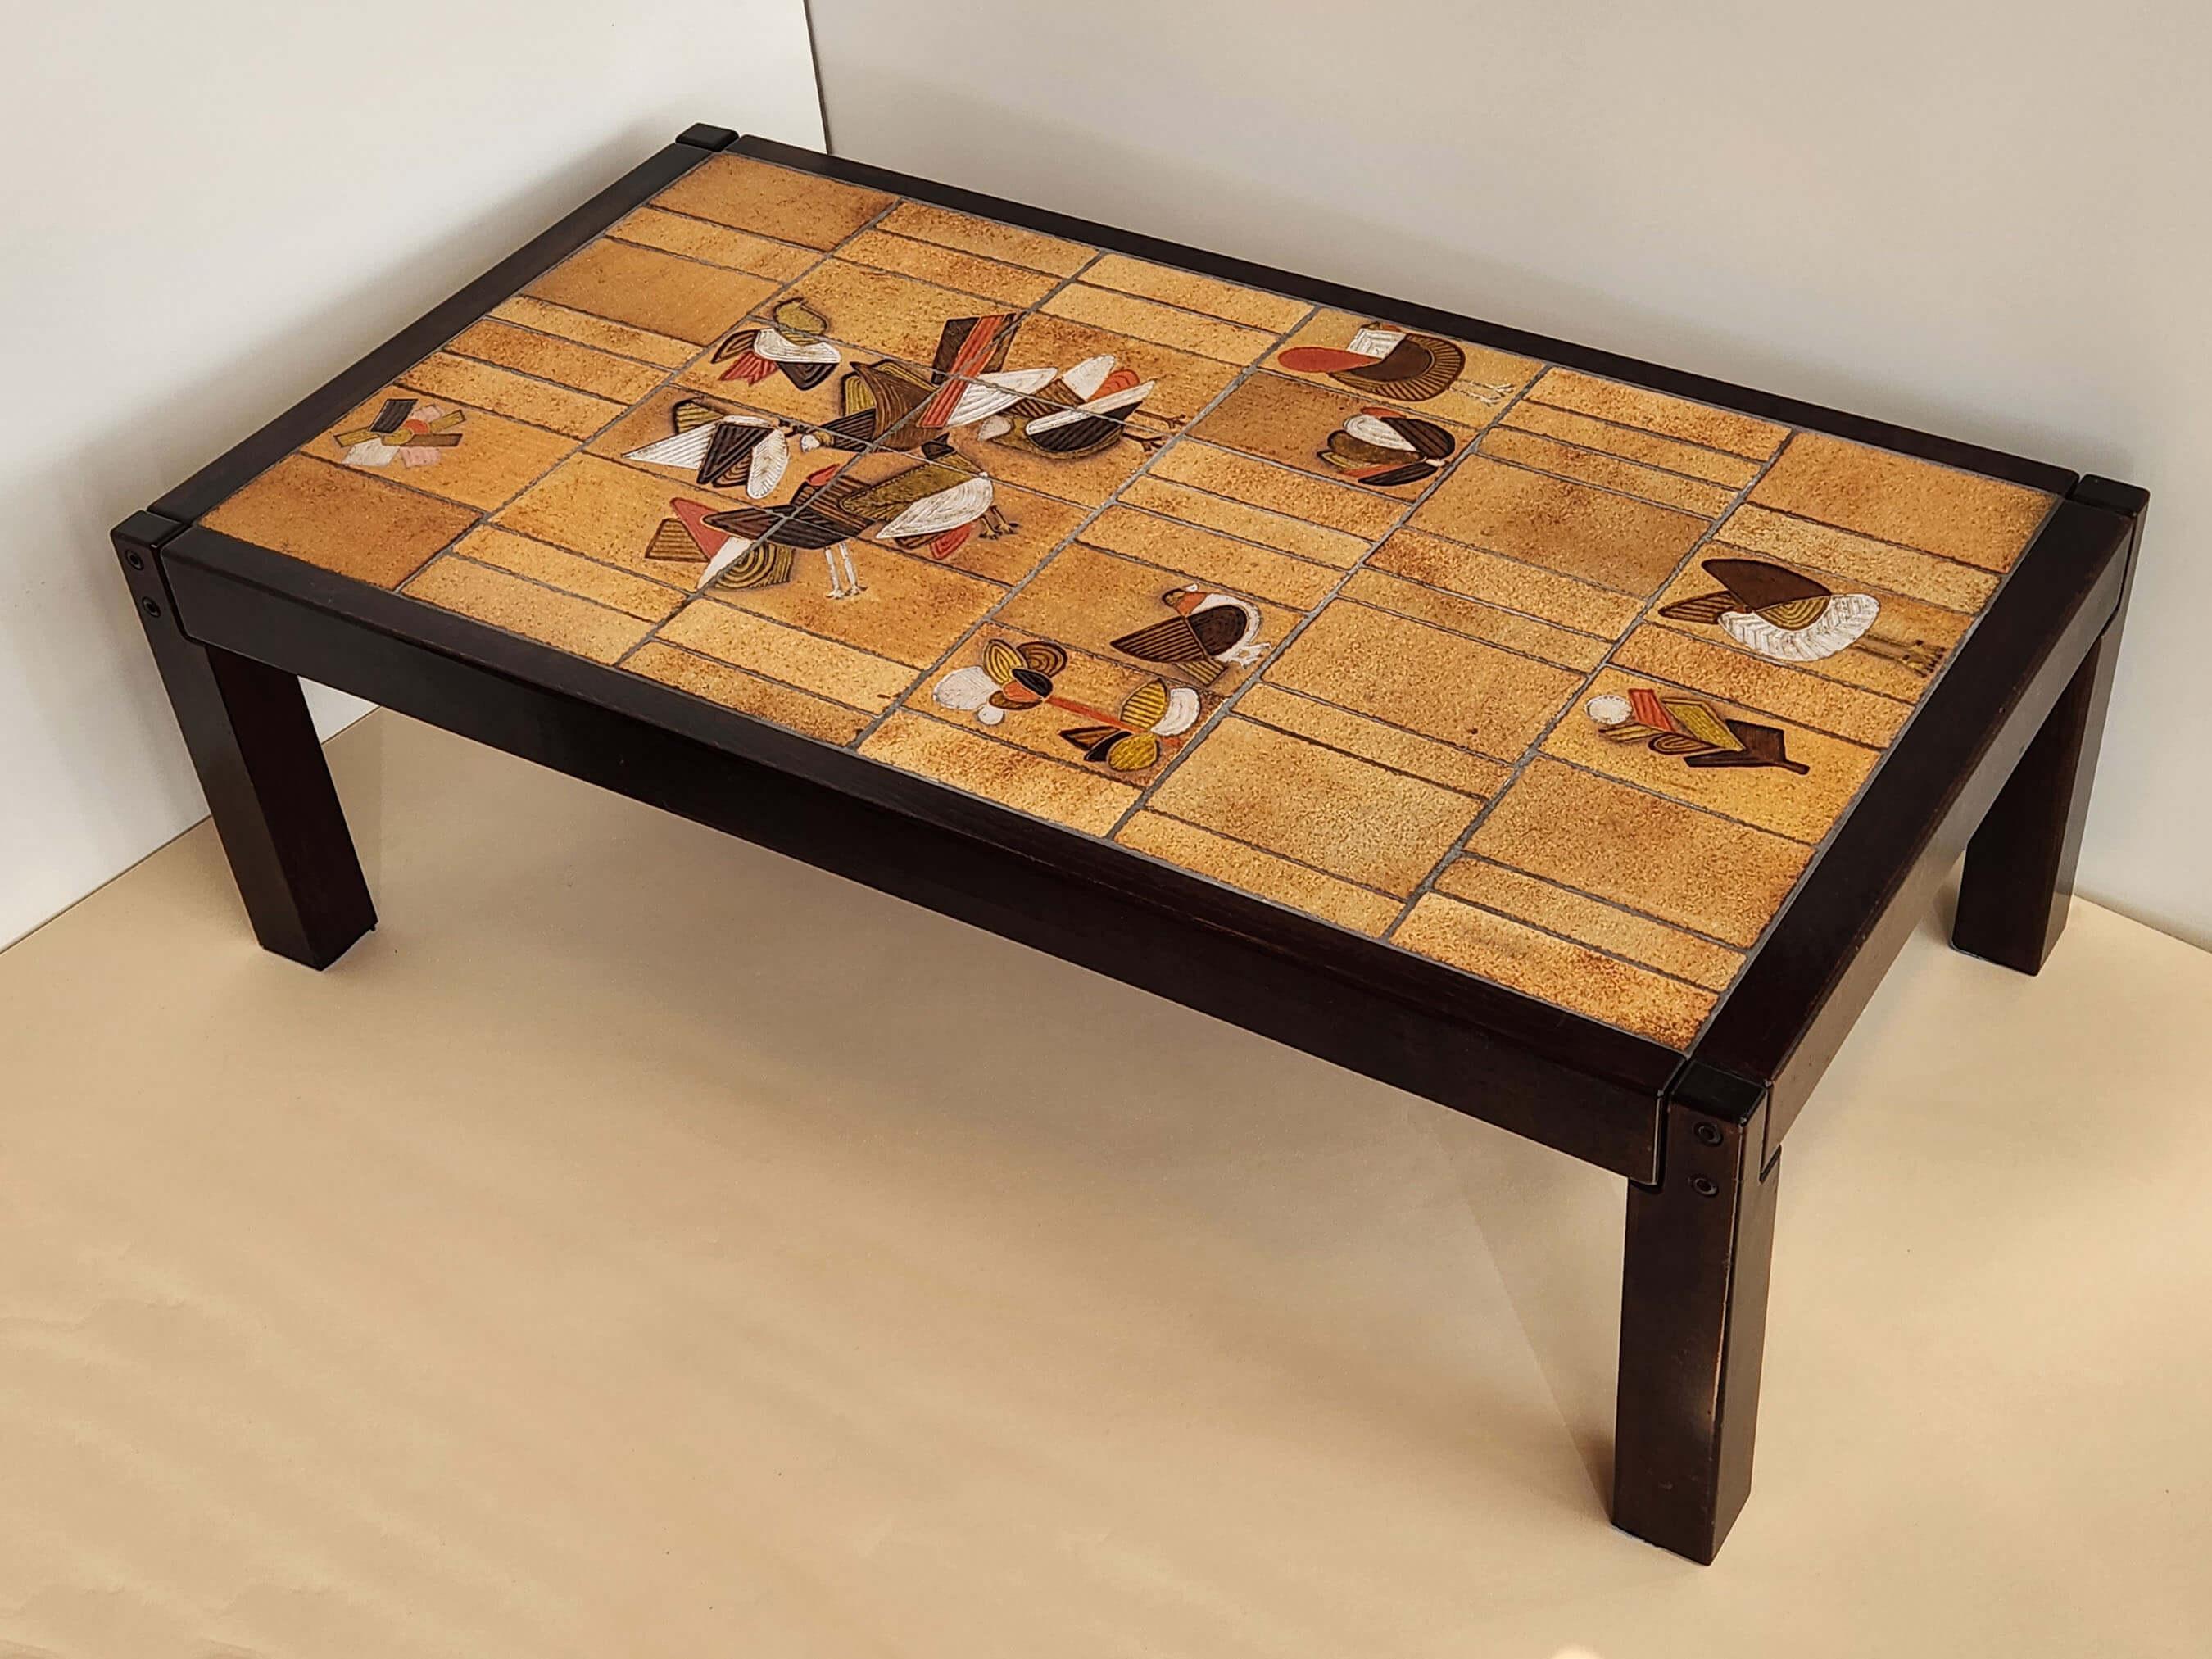 Mid-Century Modern Roger Capron - Vintage Ceramic Coffee Table with Birds Imprints on a Wood Frame  For Sale